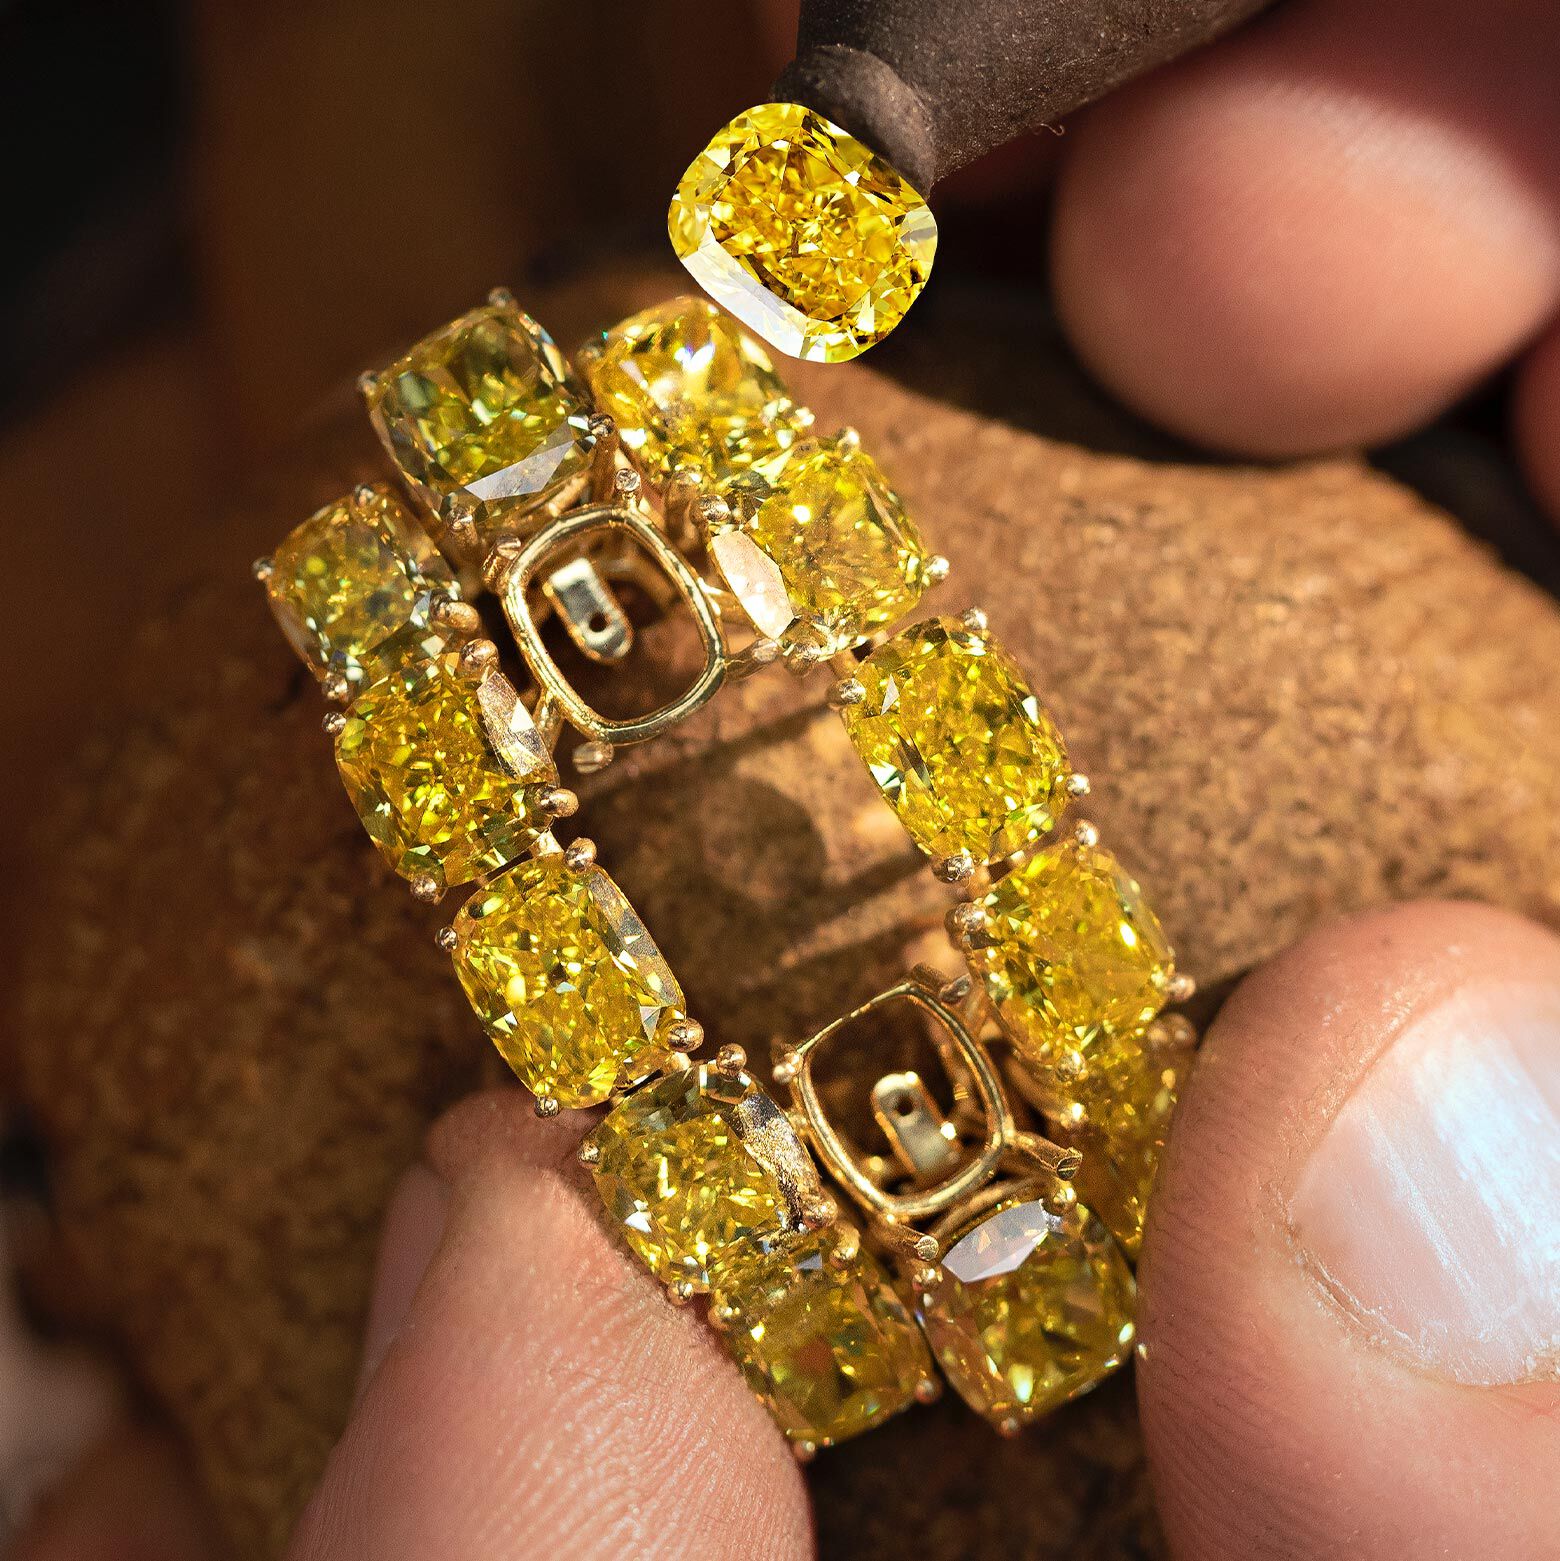 Graff Yellow and White Diamond Oval Secret Watch being created in Graff workshop by craftsman